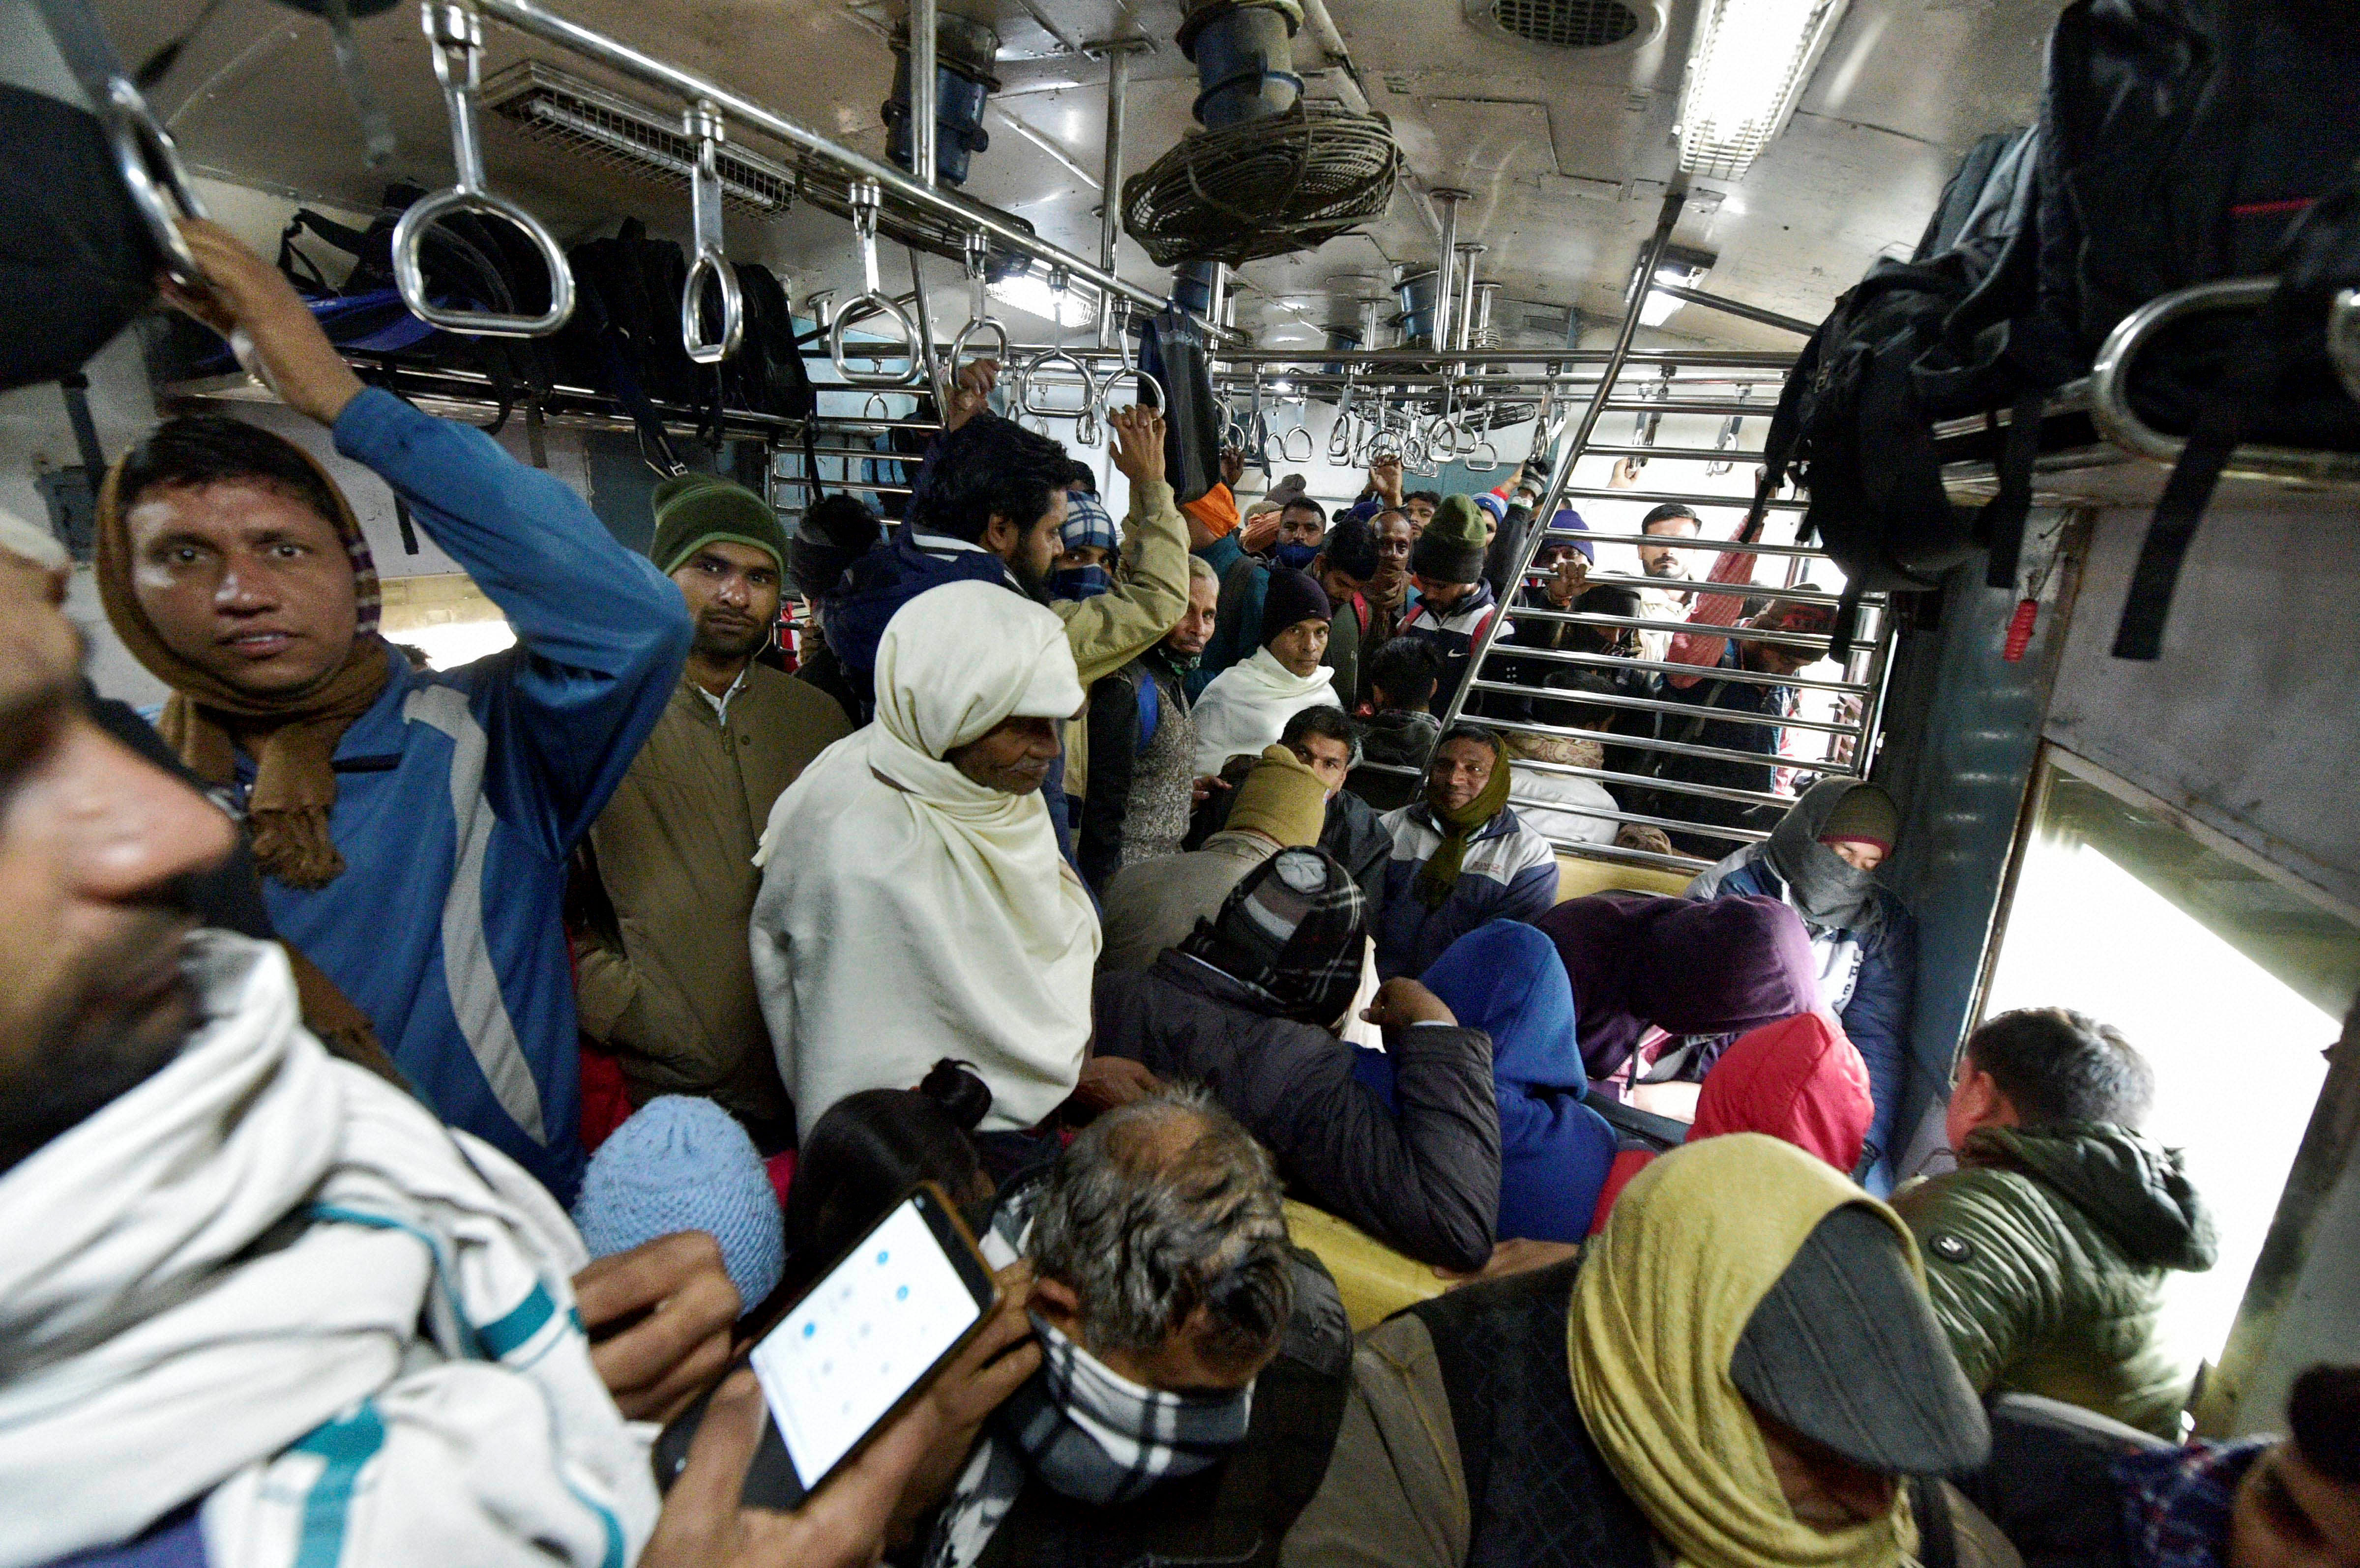 Despite concerns over Covid-19, public continues to flout mask rules and crowd an EMU train in Noida. Credit: PTI Photo